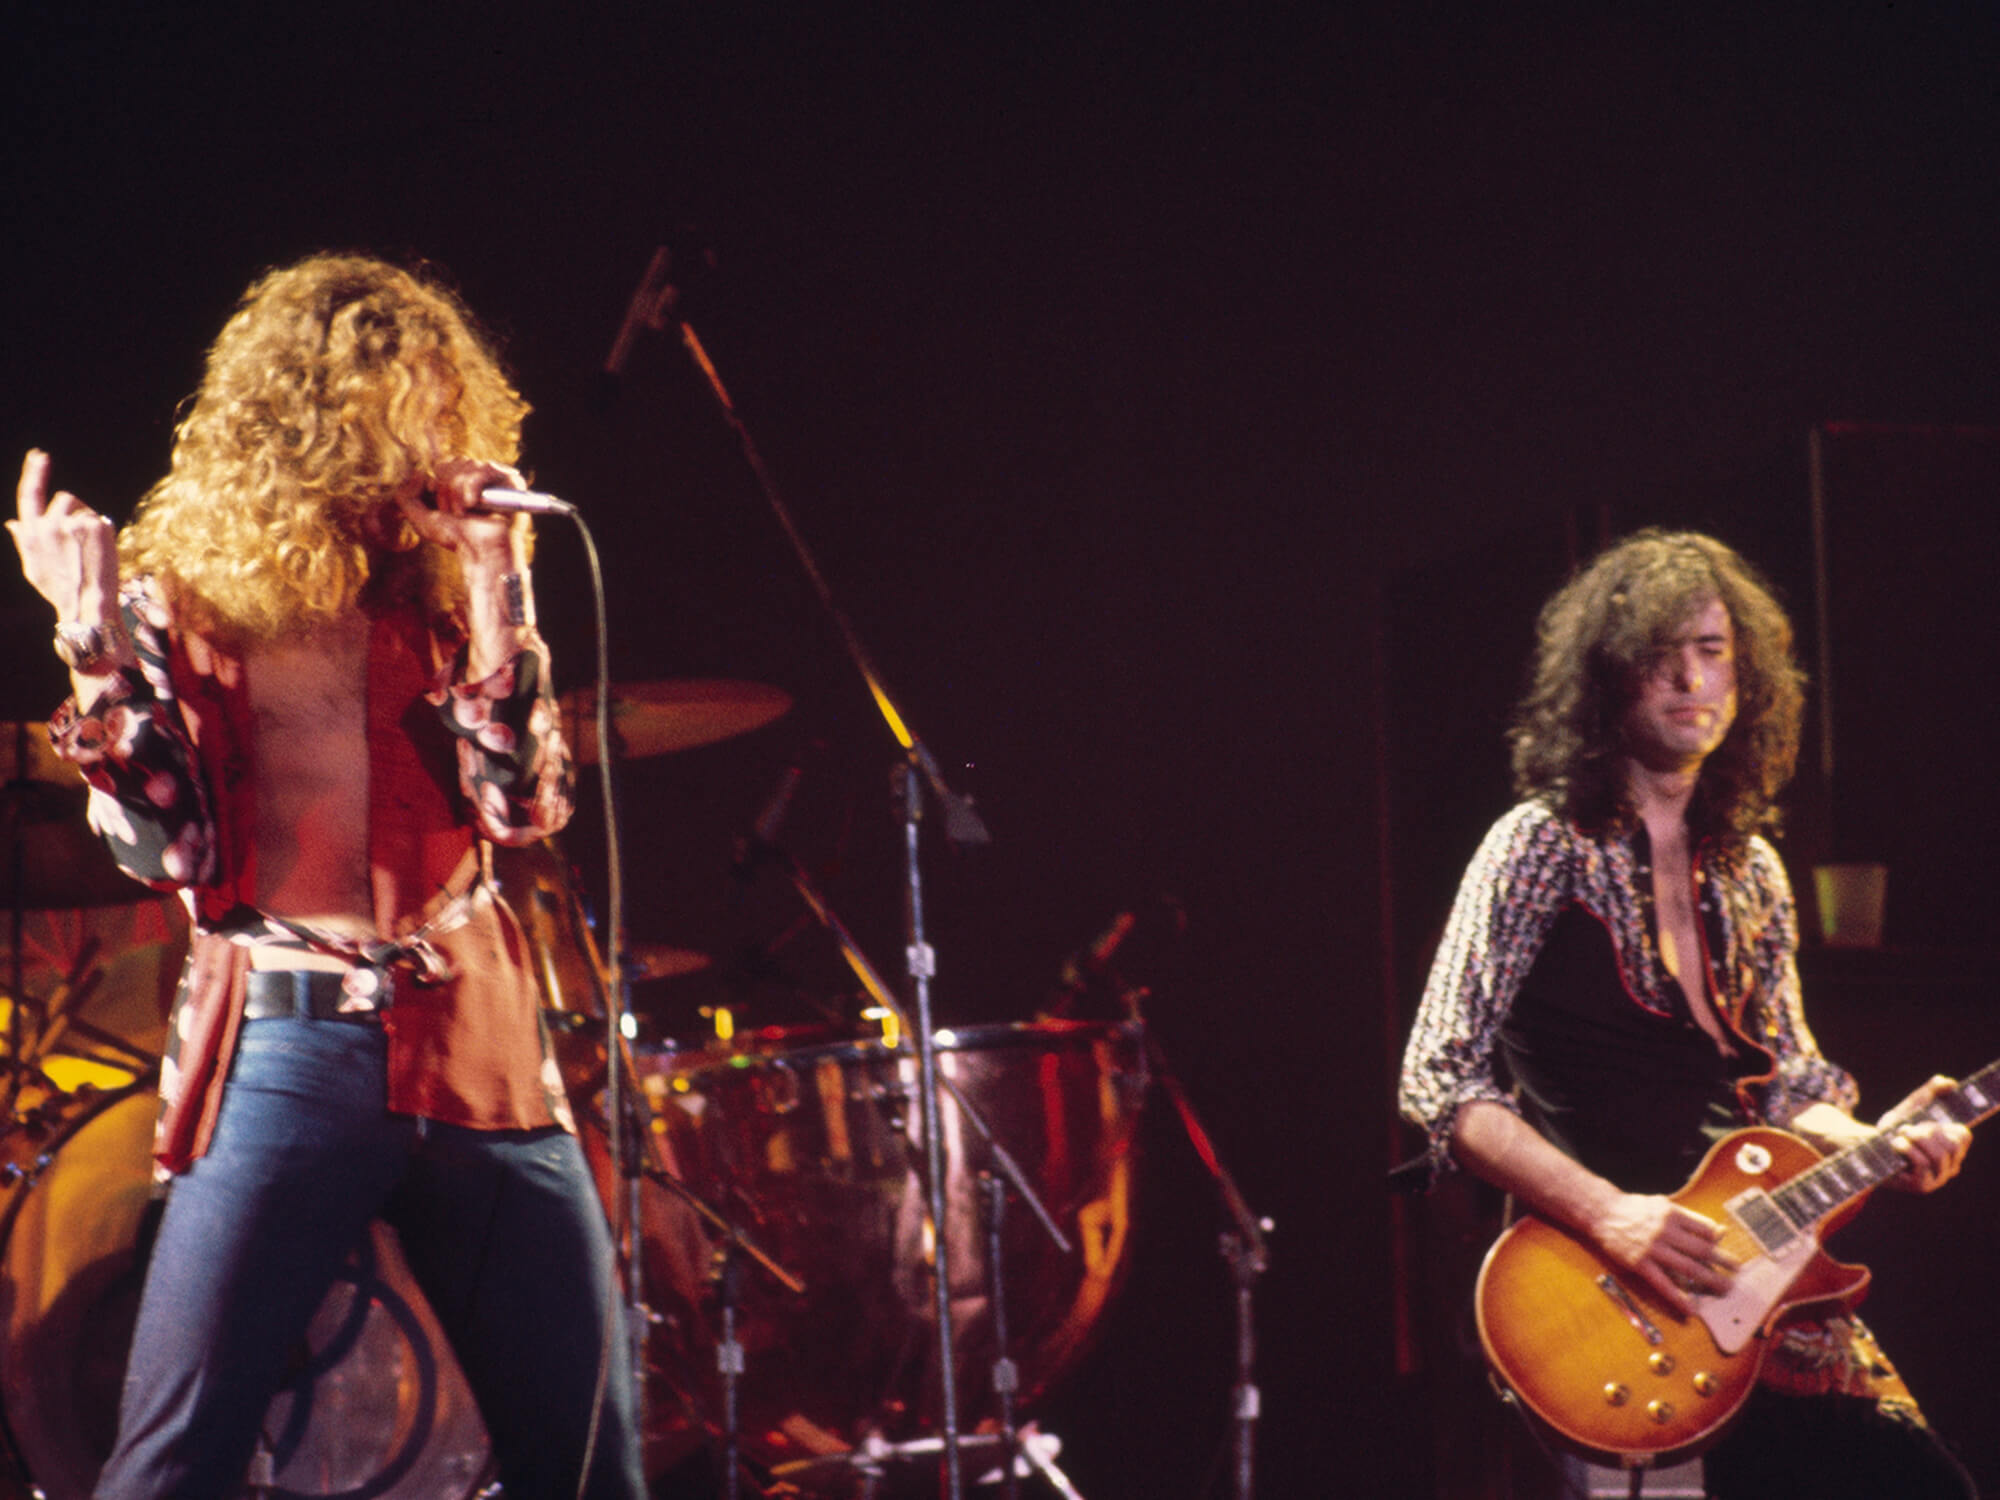 Robert Plant and Jimmy Page of Led Zeppelin onstage in 1975.